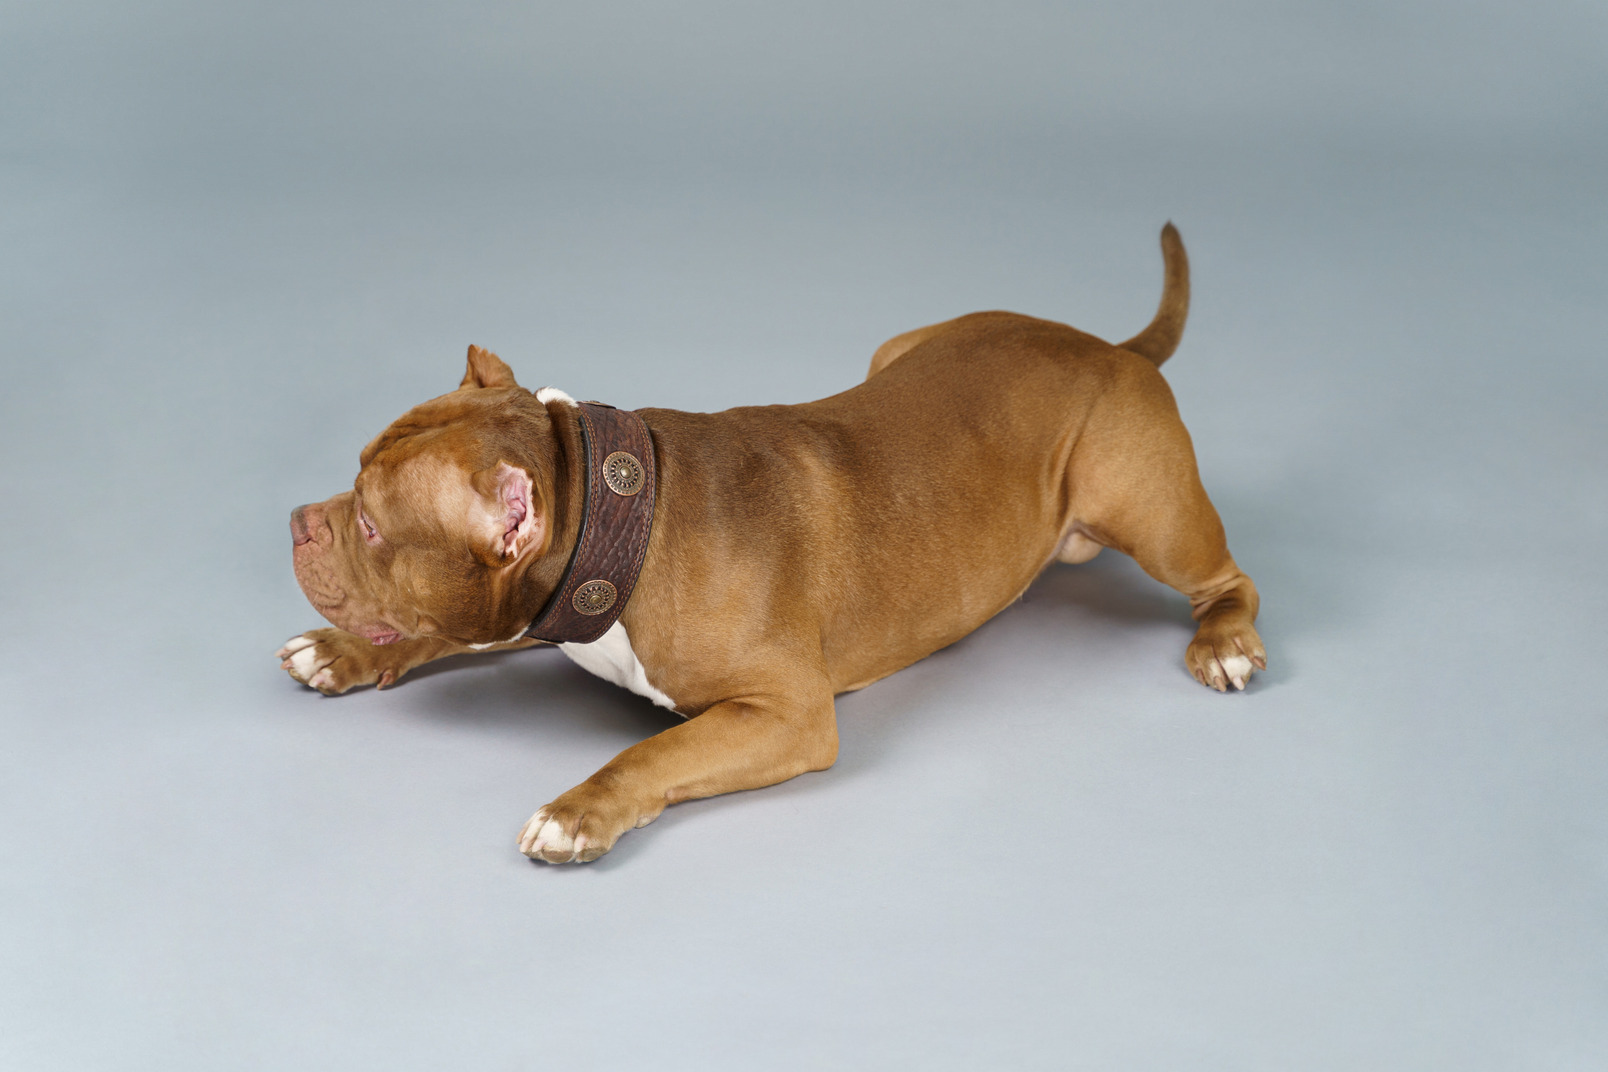 Close-up an active brown bulldog isolated on grey